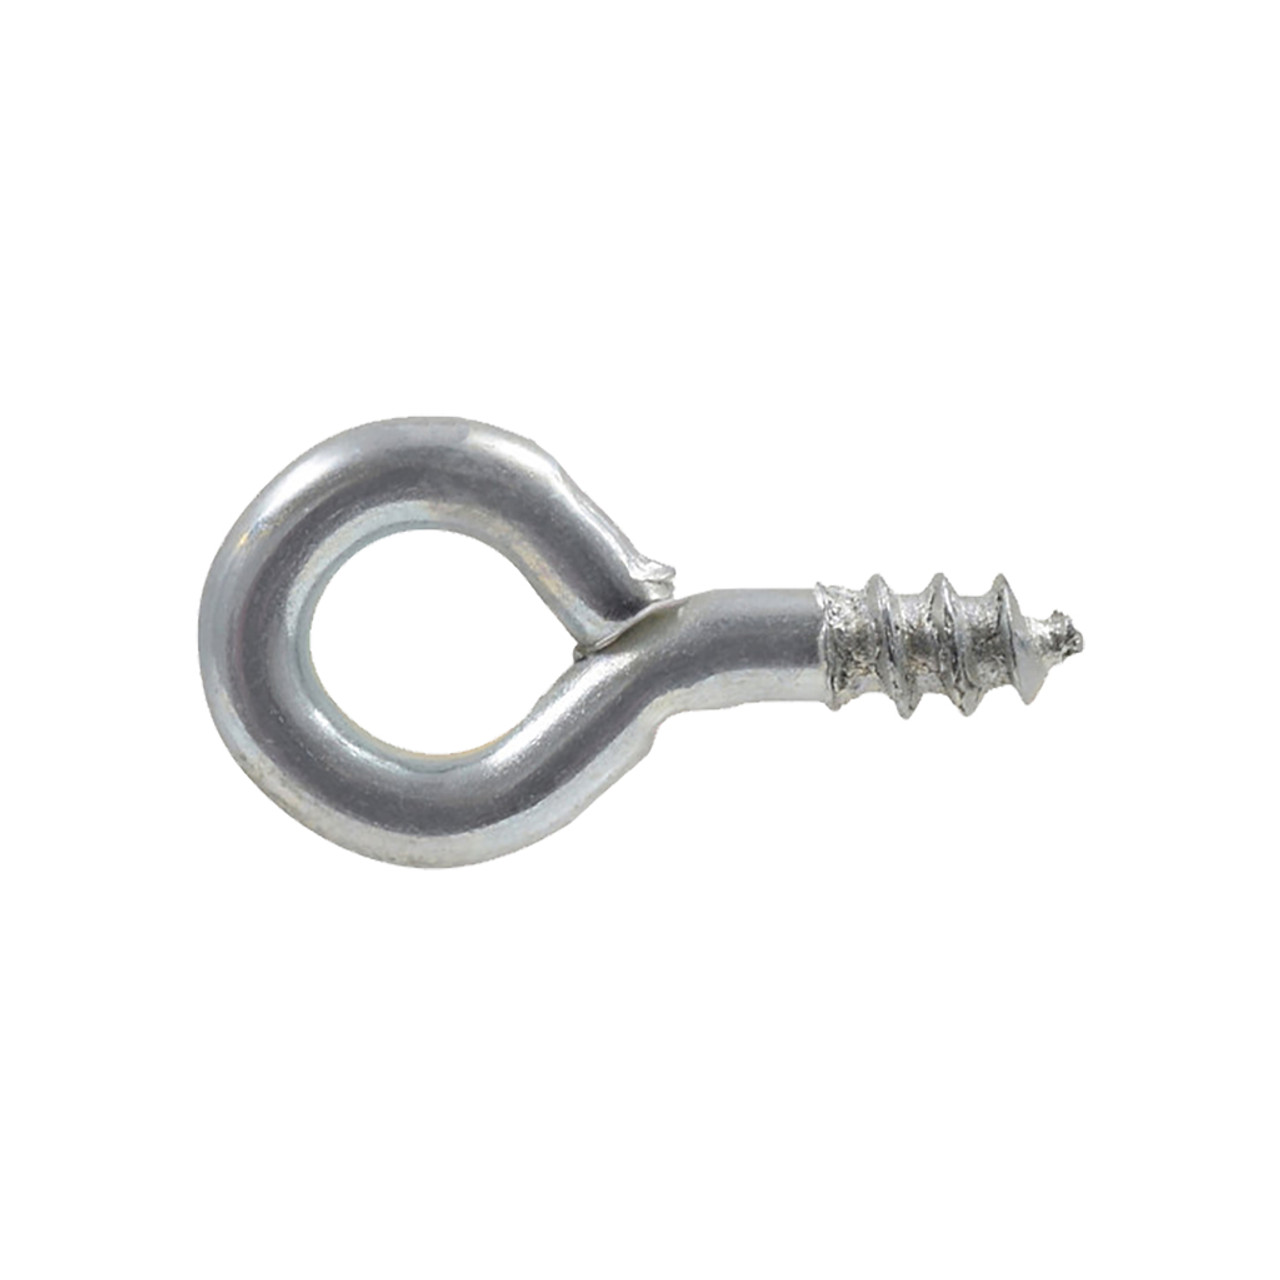 Hillman Screw Eyes Small, 13/16 - Midwest Technology Products, Screw Eyes